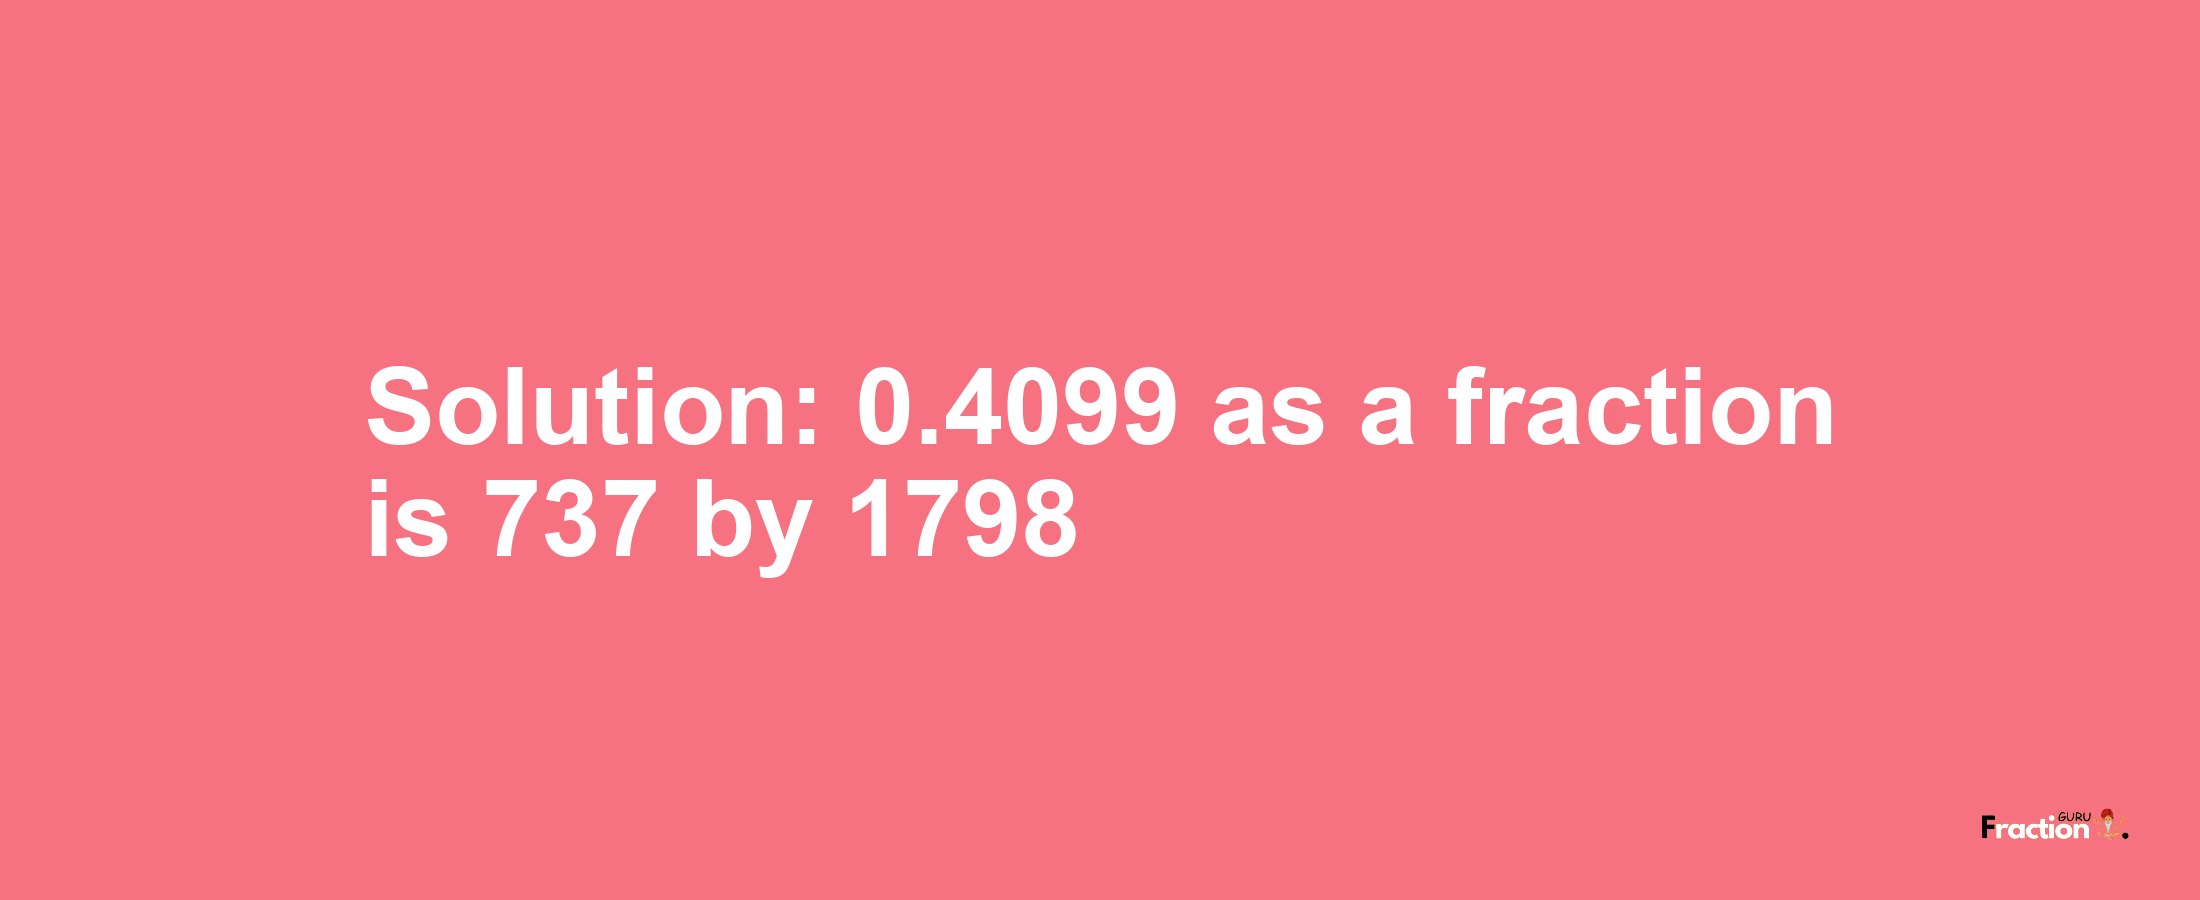 Solution:0.4099 as a fraction is 737/1798